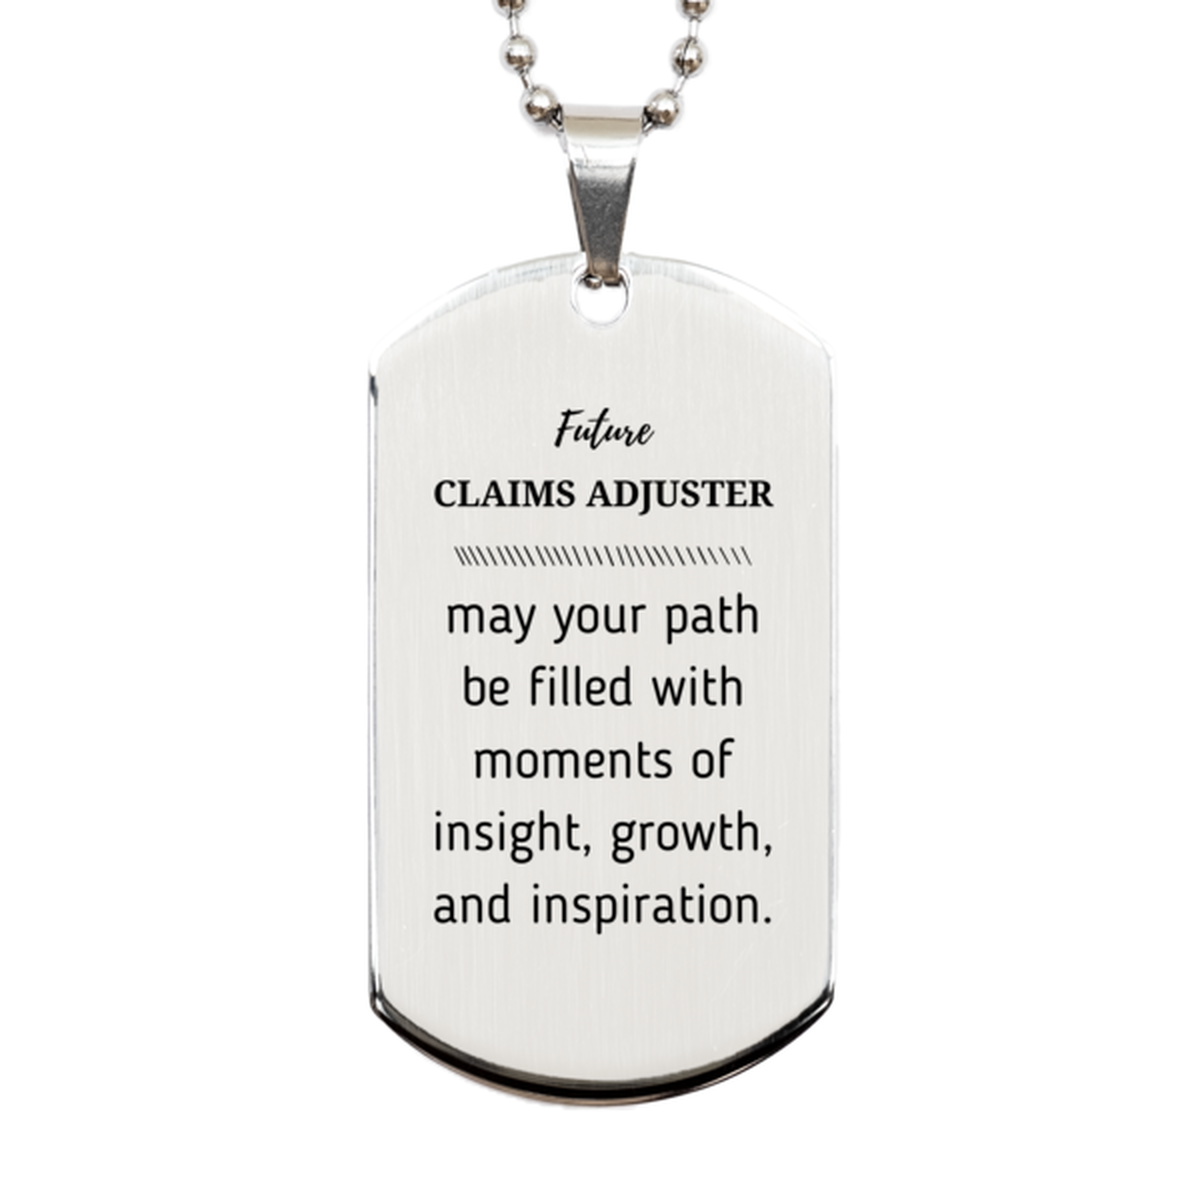 Future Claims Adjuster Gifts, May your path be filled with moments of insight, Graduation Gifts for New Claims Adjuster, Christmas Unique Silver Dog Tag For Men, Women, Friends